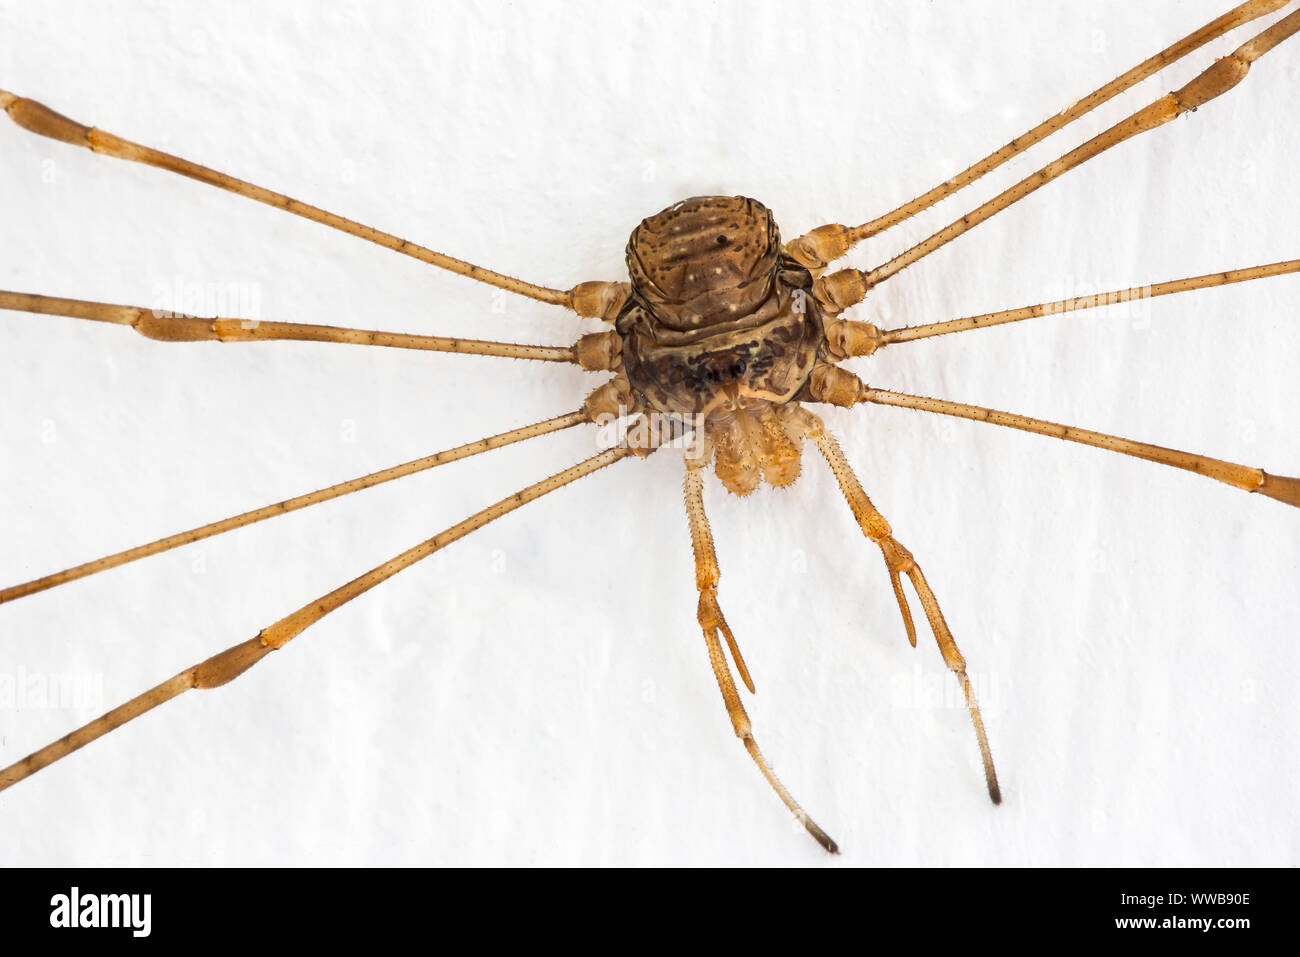 Harvestman spider [ Dicranopalpus Ramosus ] on house, an arachnid but not actually a spider having only one body segment , 2 eyes and no venom gland. Stock Photo